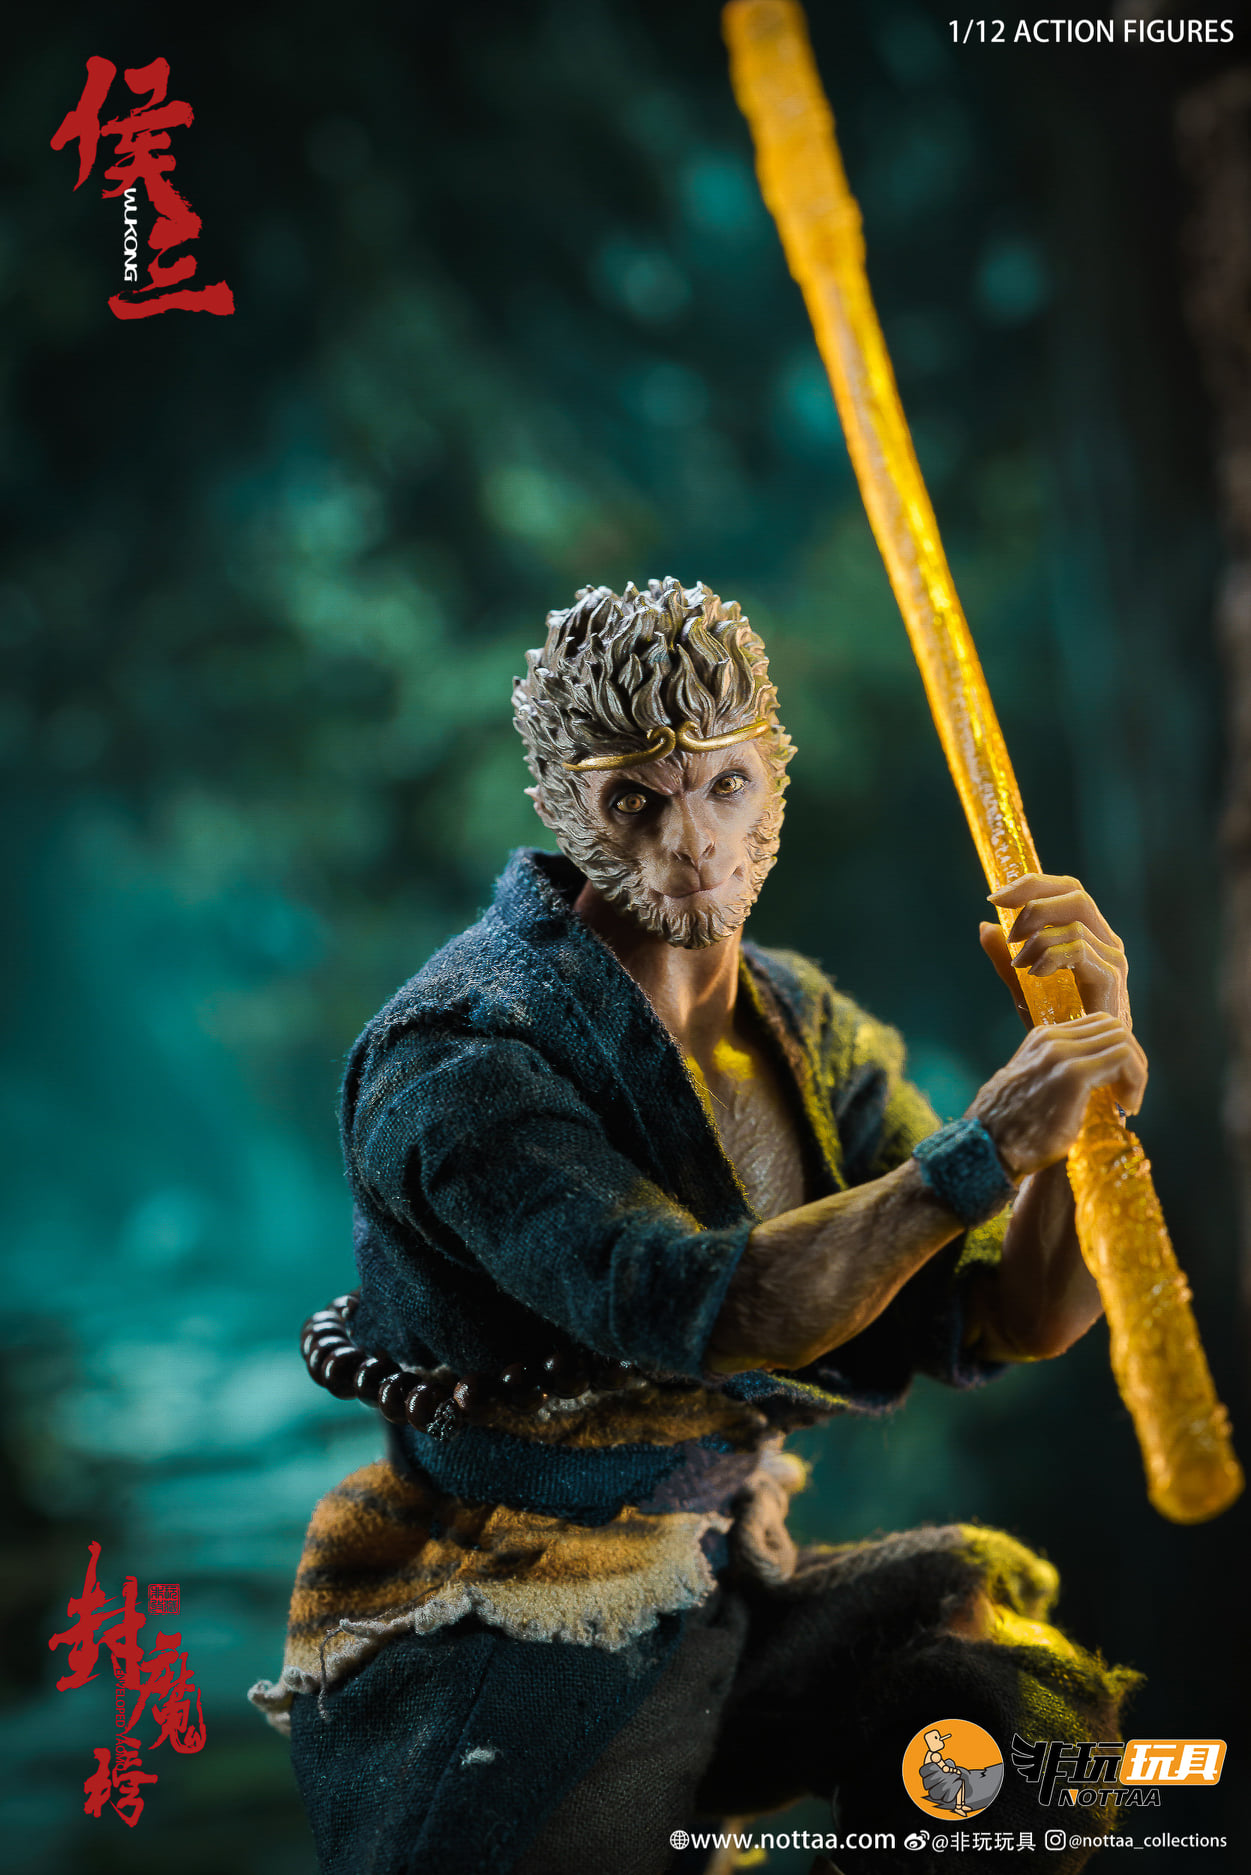 NEW PRODUCT: 1/12 NOTTAA | The Seal of Demons - Martial Artist Monk WUKONG 2712